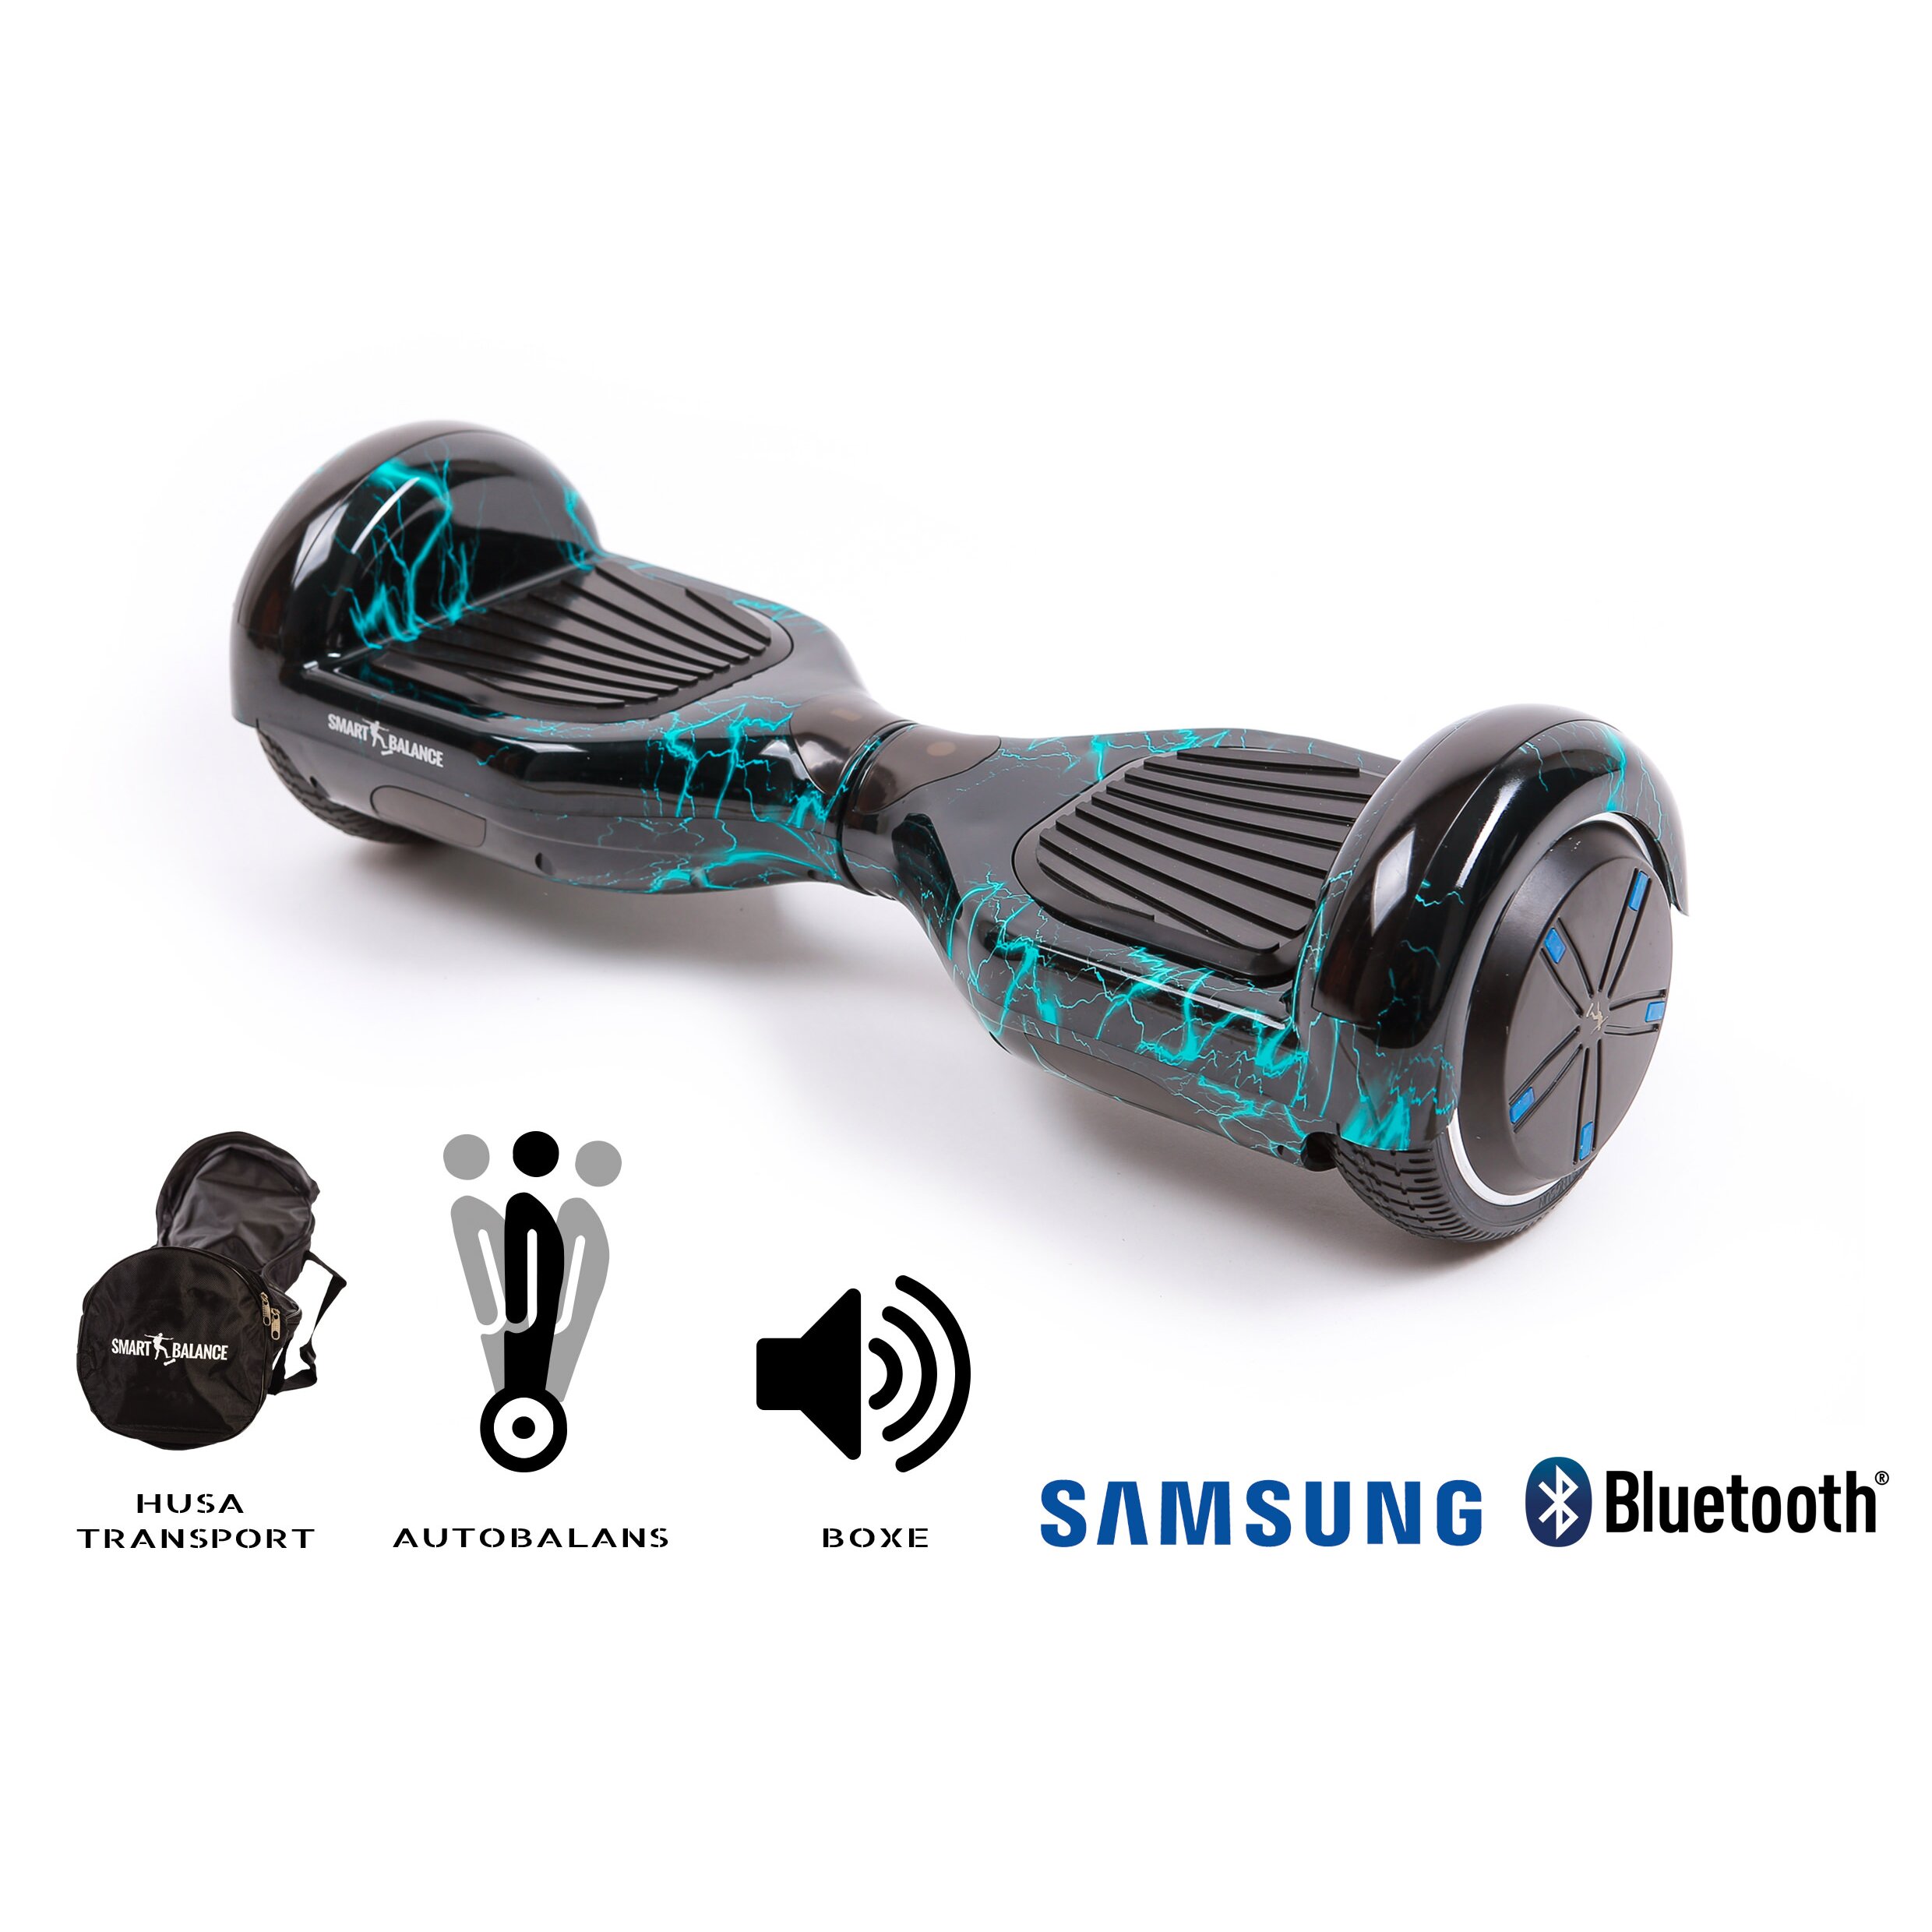 Hoverboard Smart Balance Premium Brand, Regular Thunderstorm, 6.5 inch, Bluetooth Samsung Cell battery, Built-in speakers, AutoBalans, 700W, LED